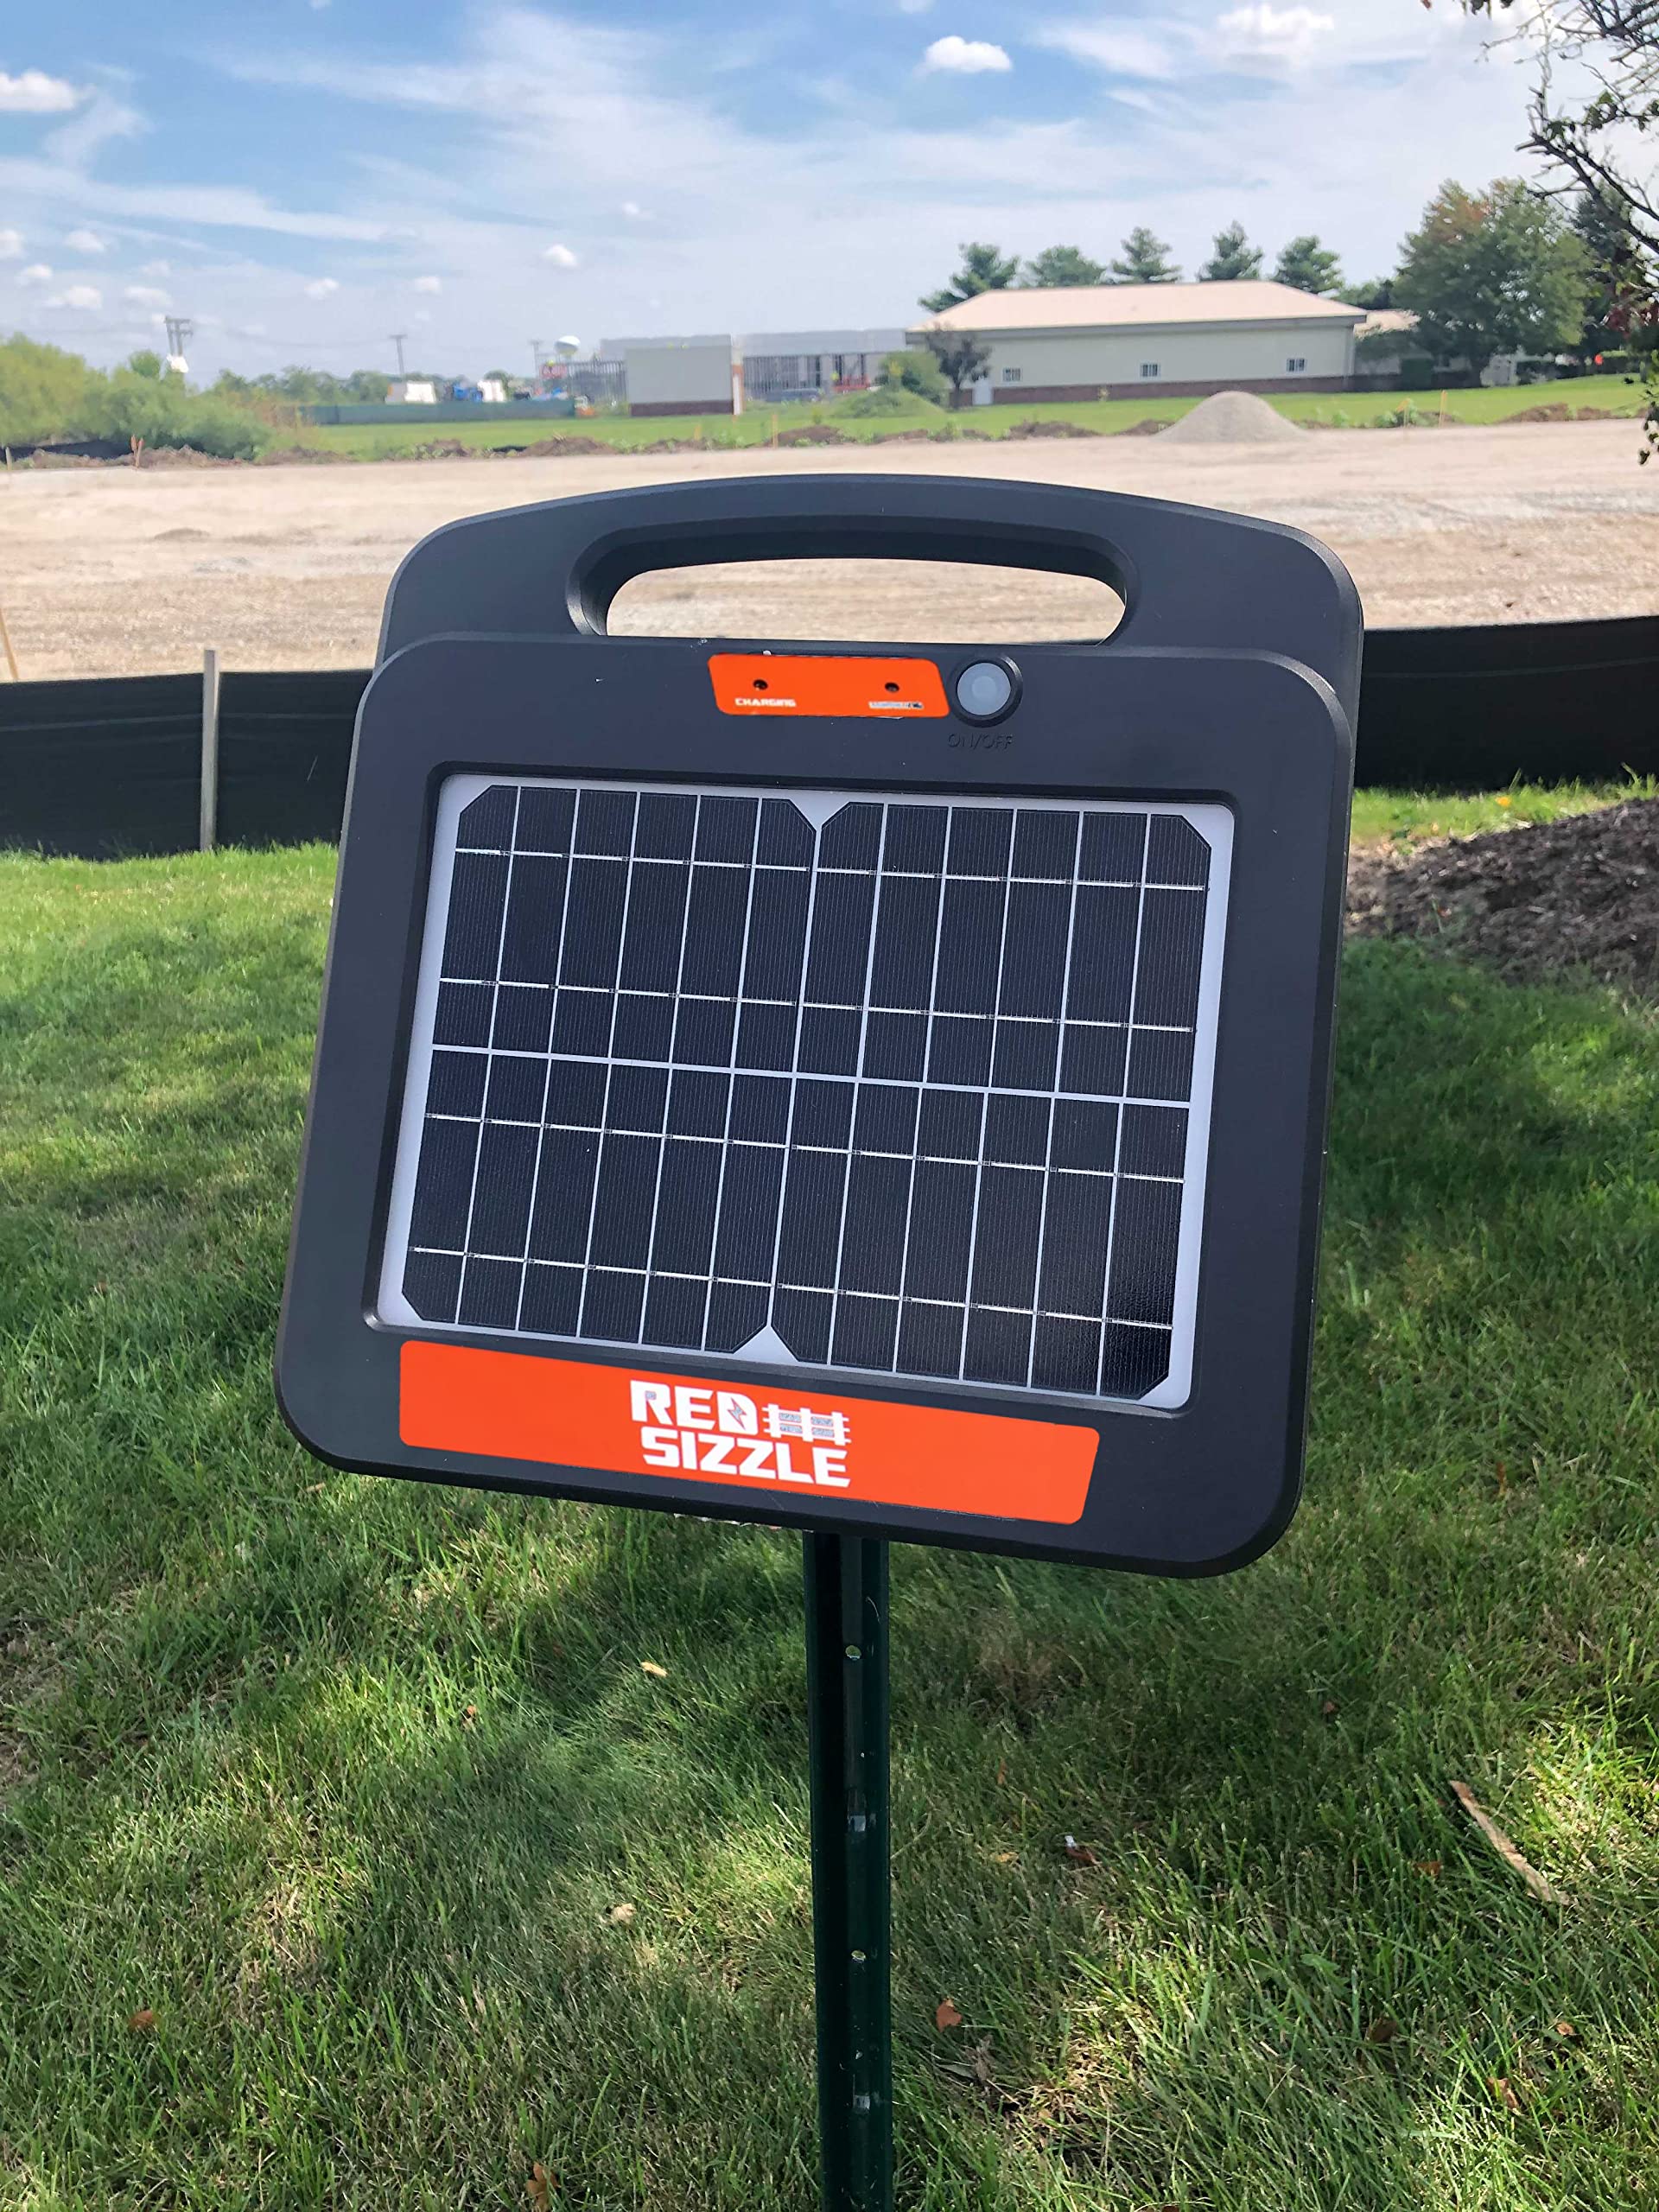 Do Solar Electric Fences Work Well?